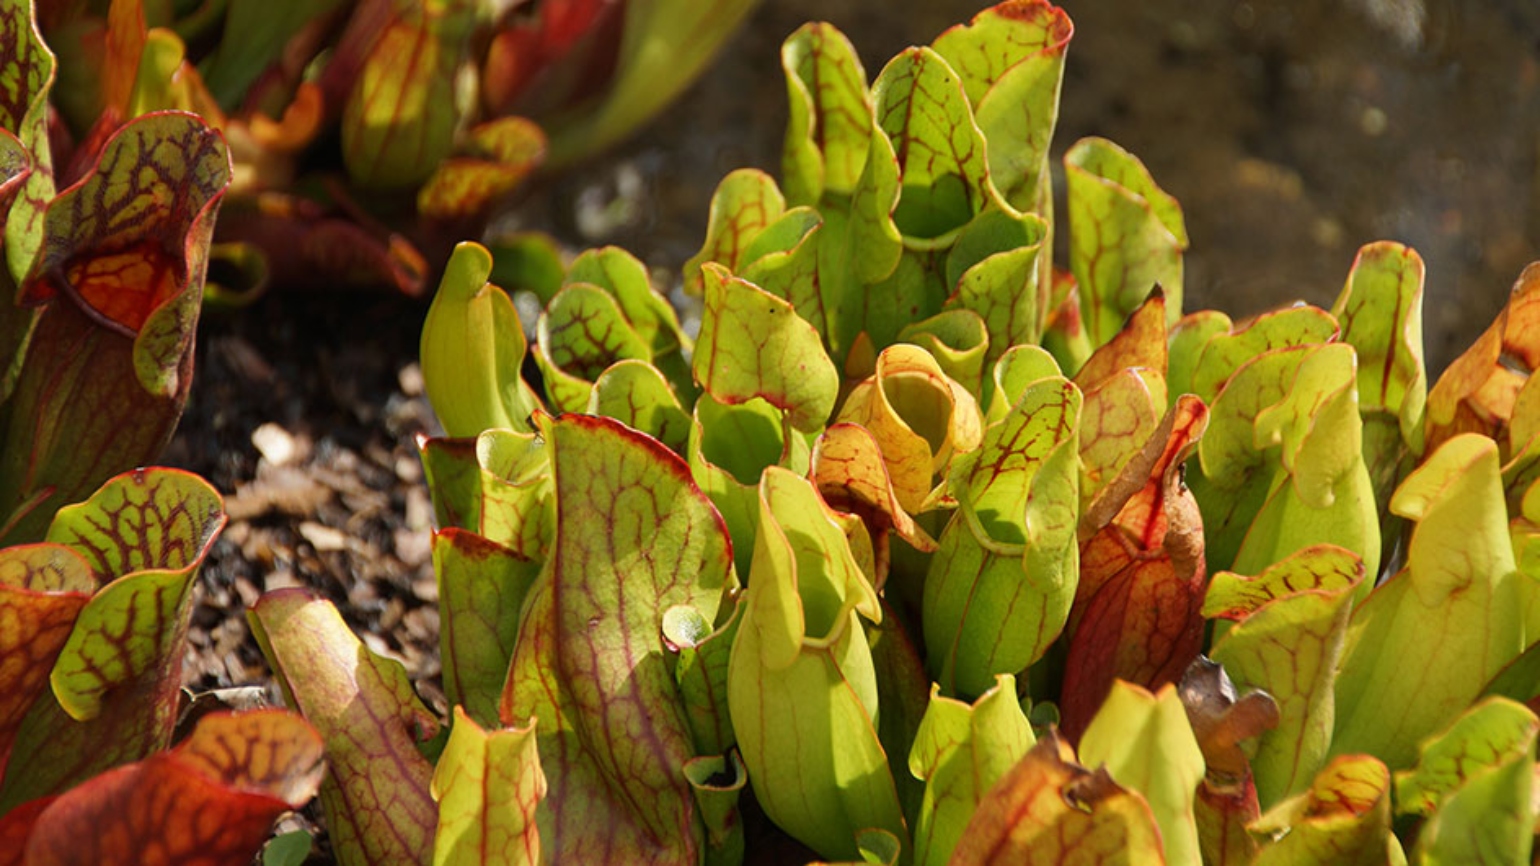 Modified, tubular leaves with hooded open lids of the purple pitcher plant